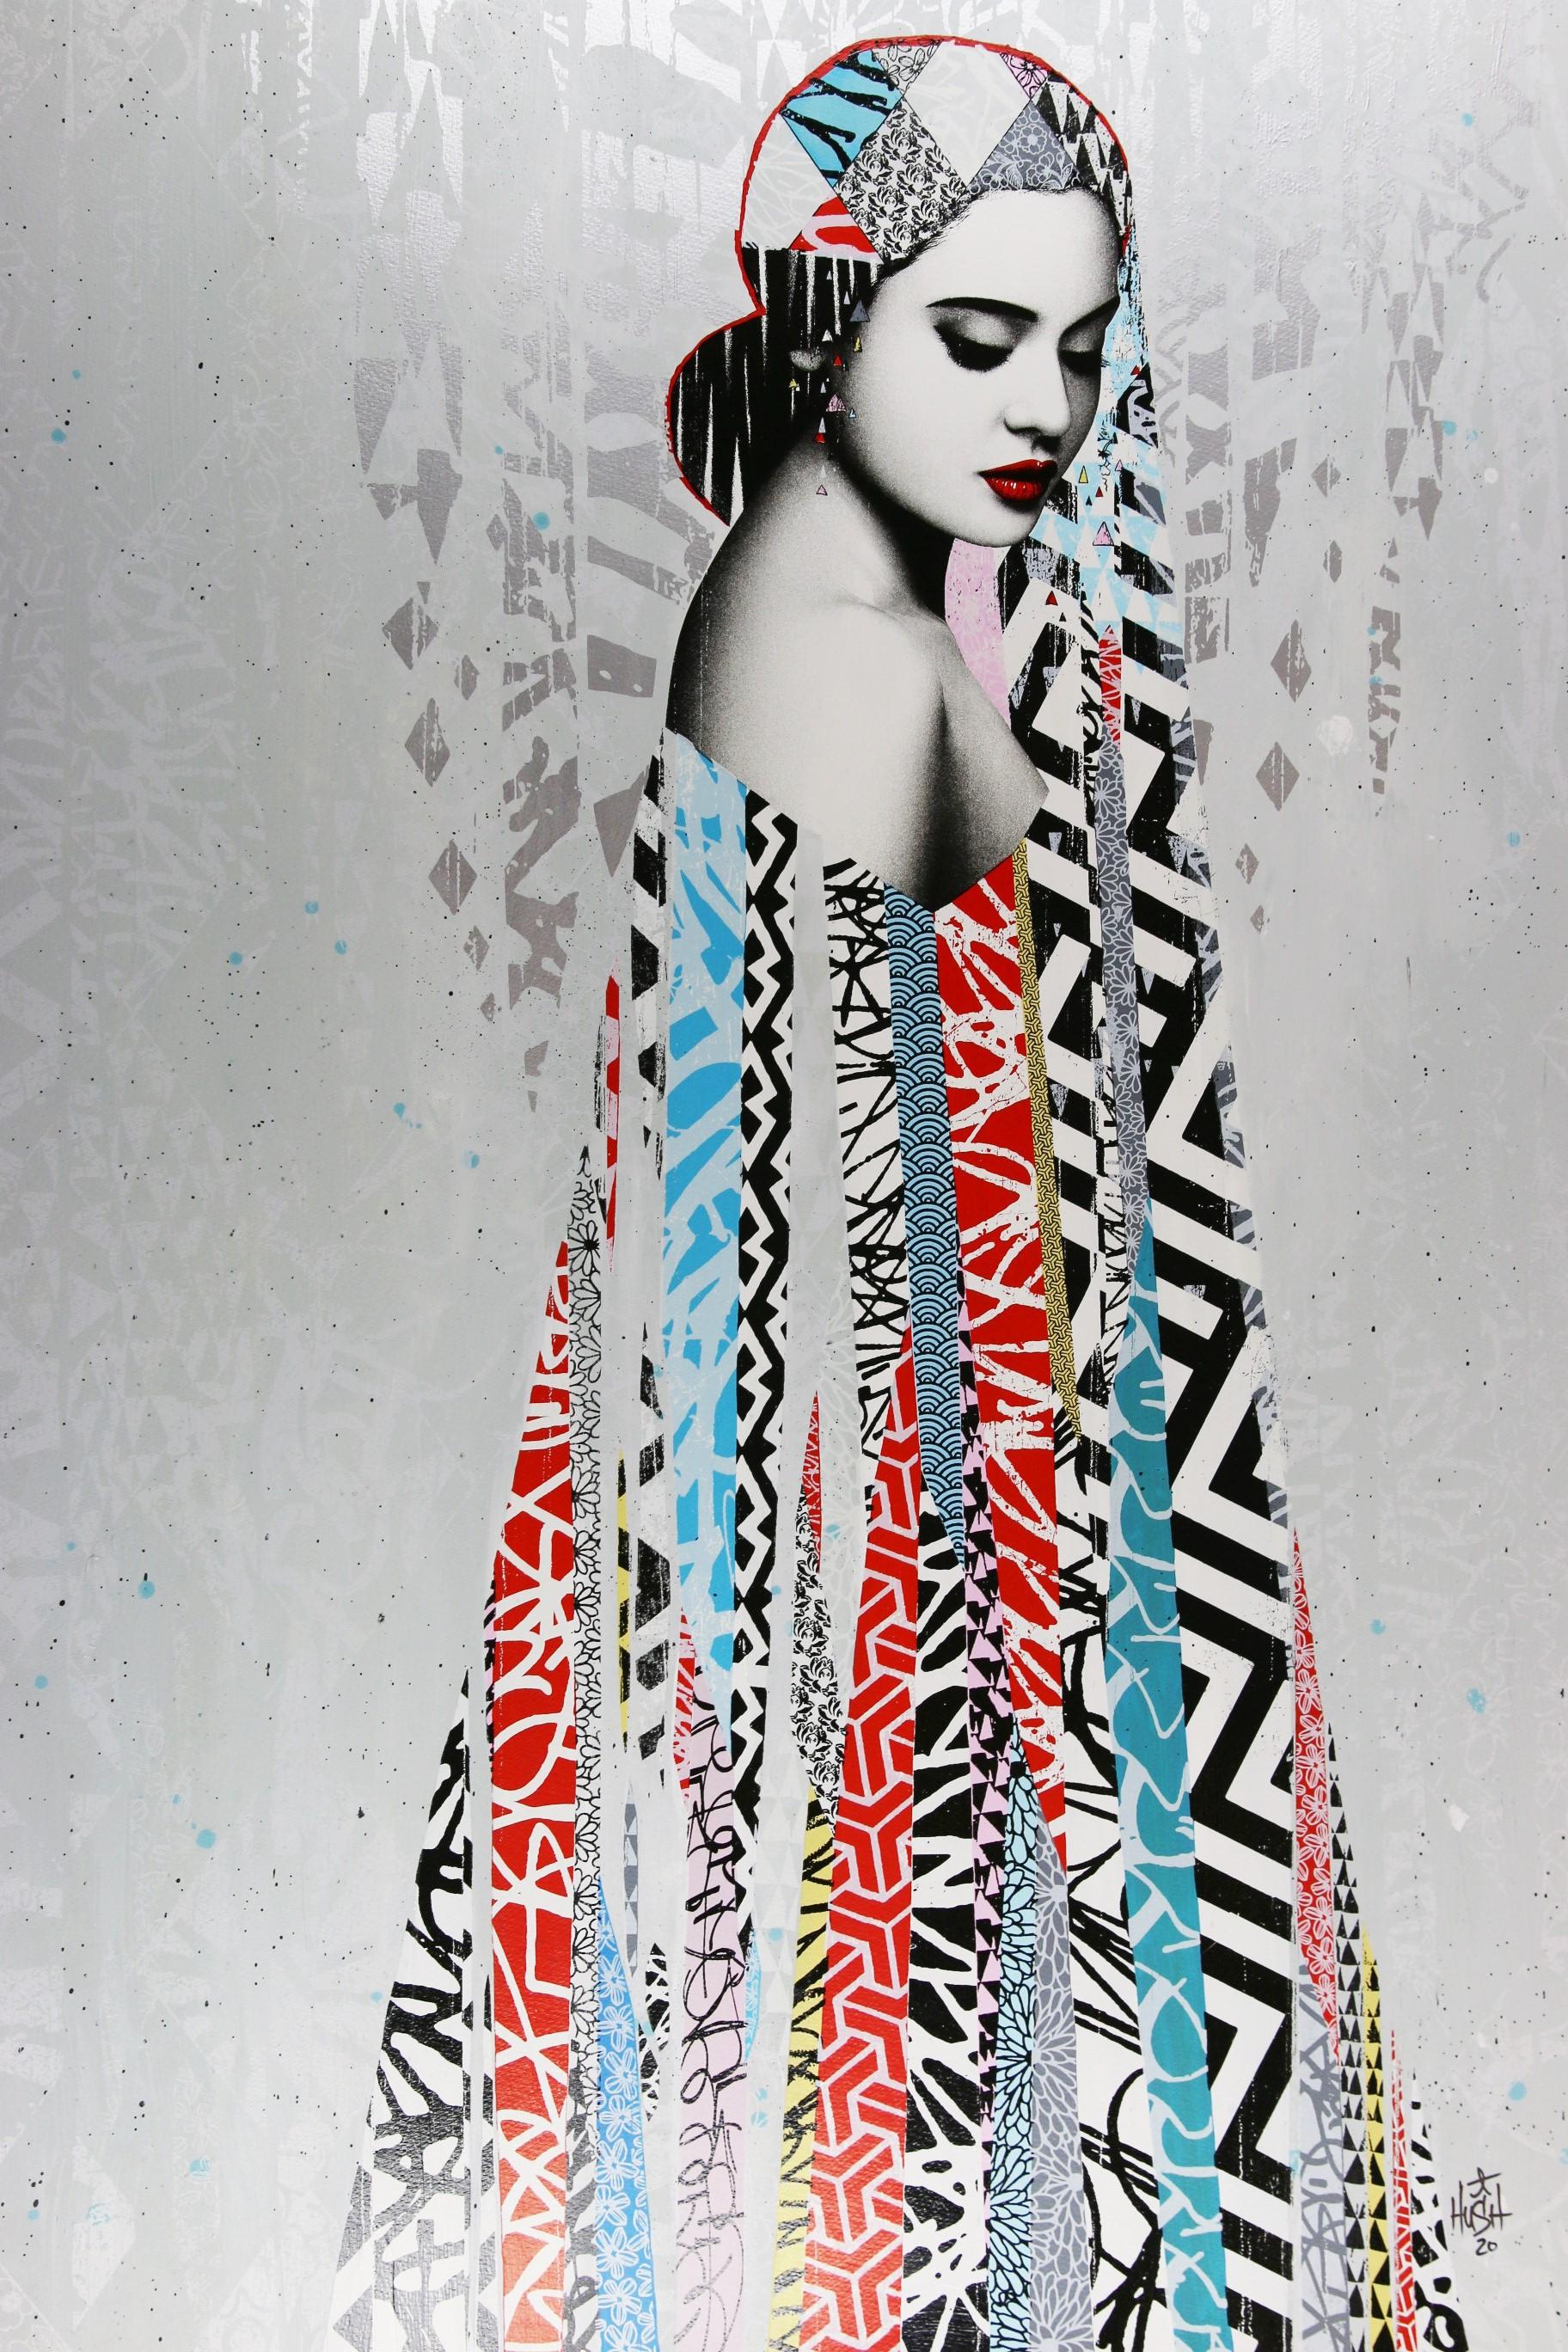 Elysian by Hush Signed and Numbered Hand Painted Multiple Screen Print